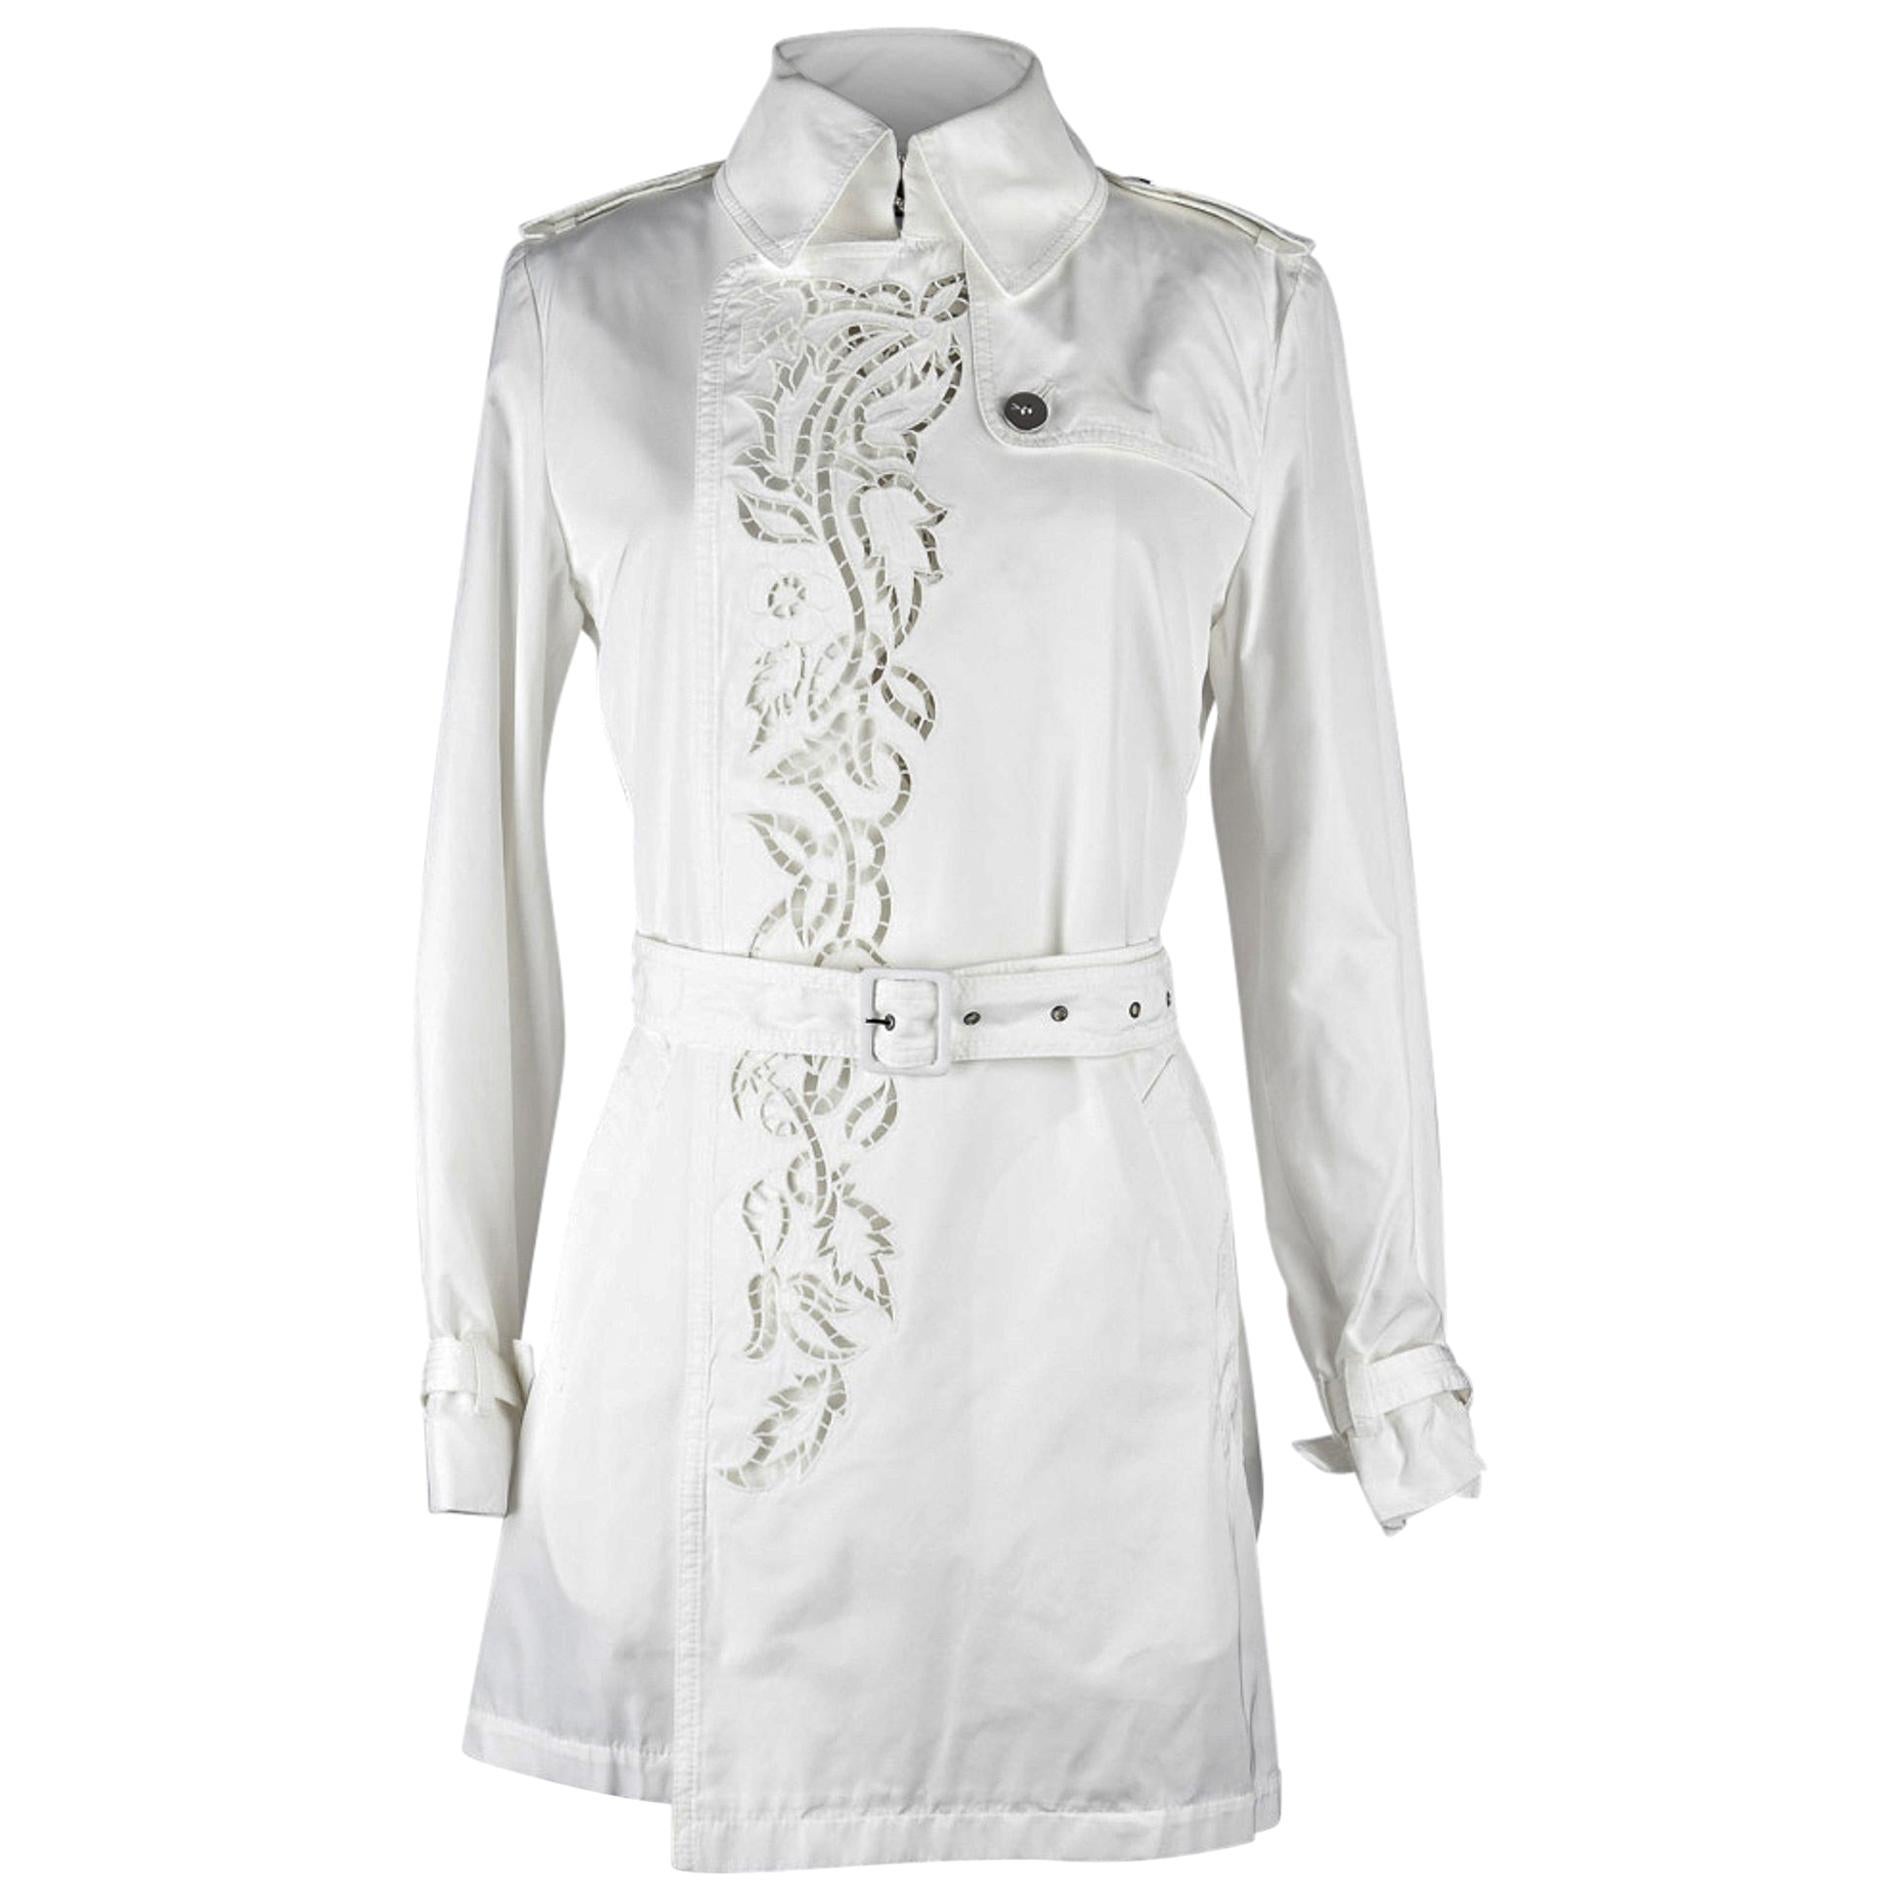 Roberto Cavalli Coat Trench Laser Cut Detail Winter White 42 / 8 New w/ Tag